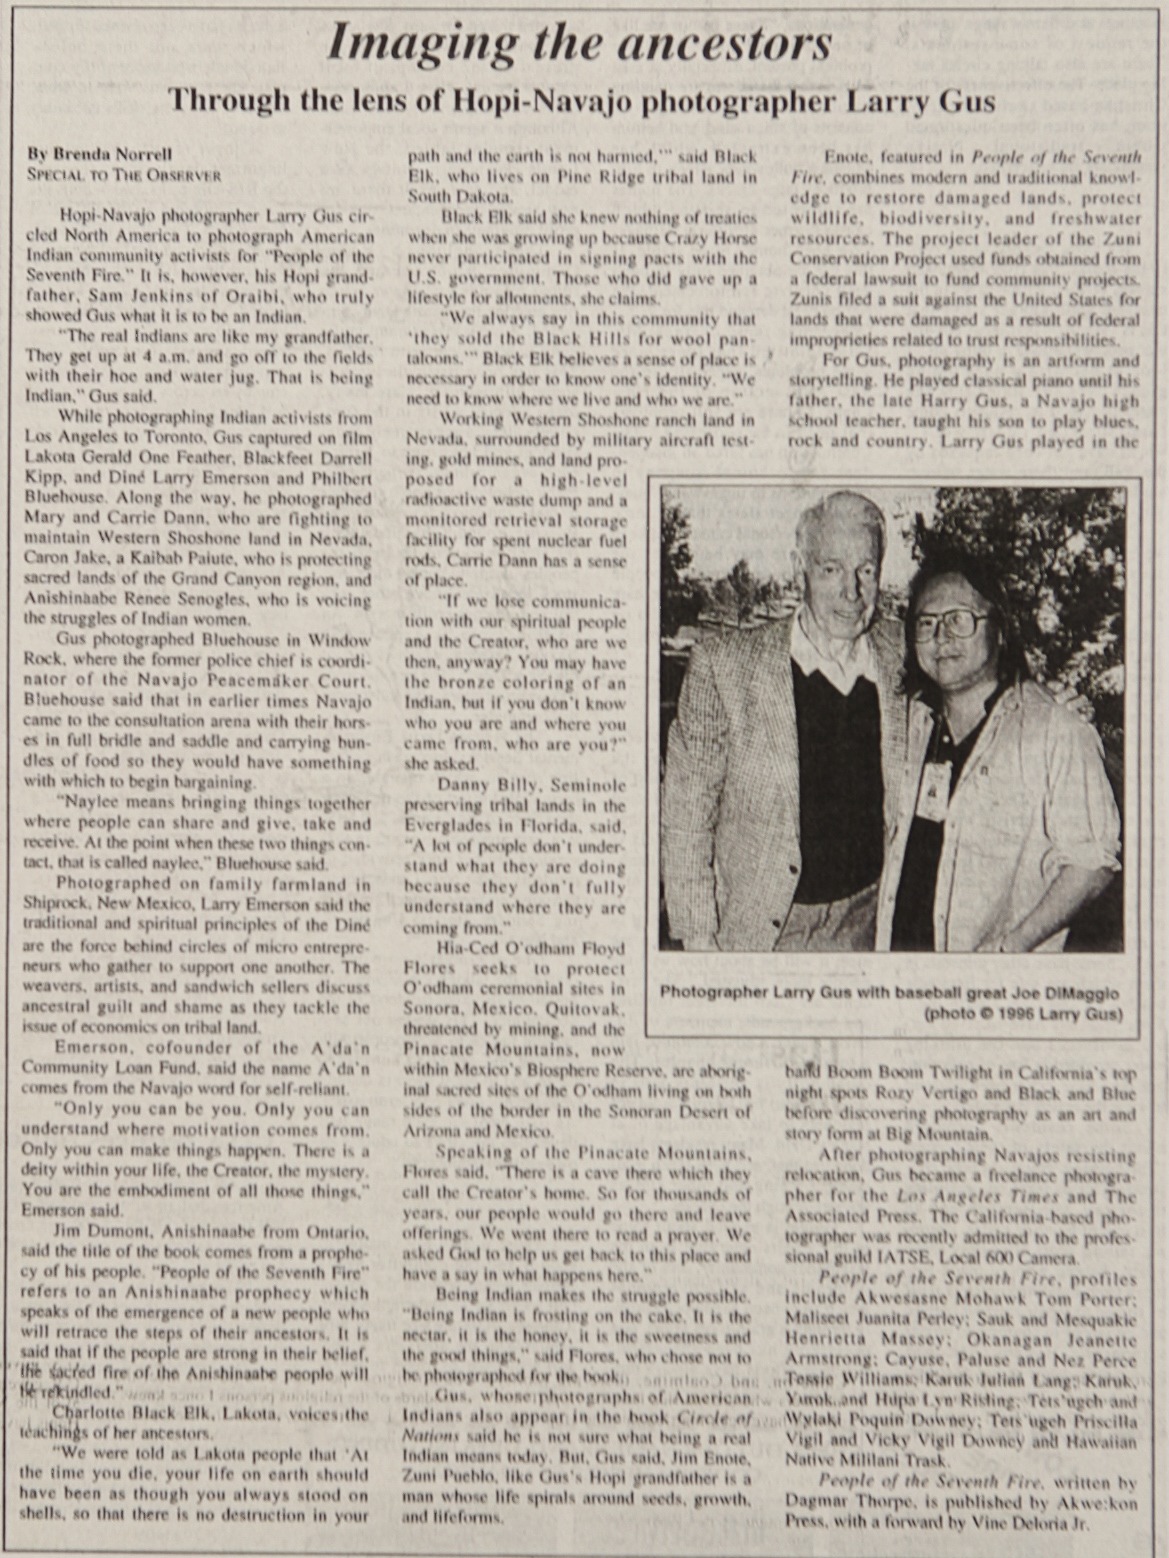 Article about Photographer Larry Gus with photograph of the photographer next to baseball great Joe DiMaggio.